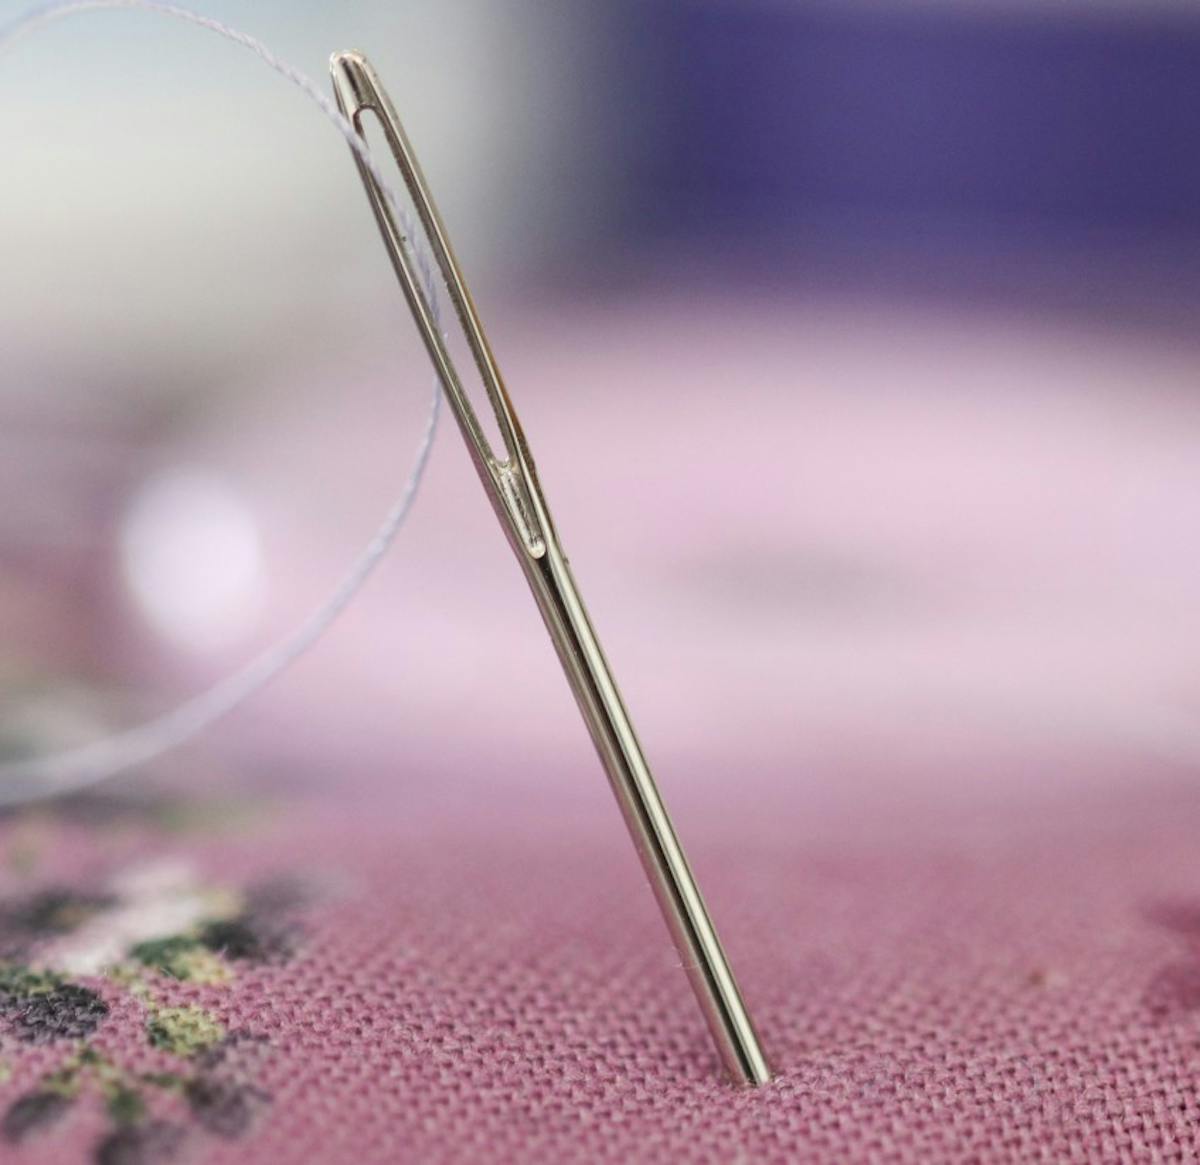  needle in pink pin cushion with thread through the eye of the needle